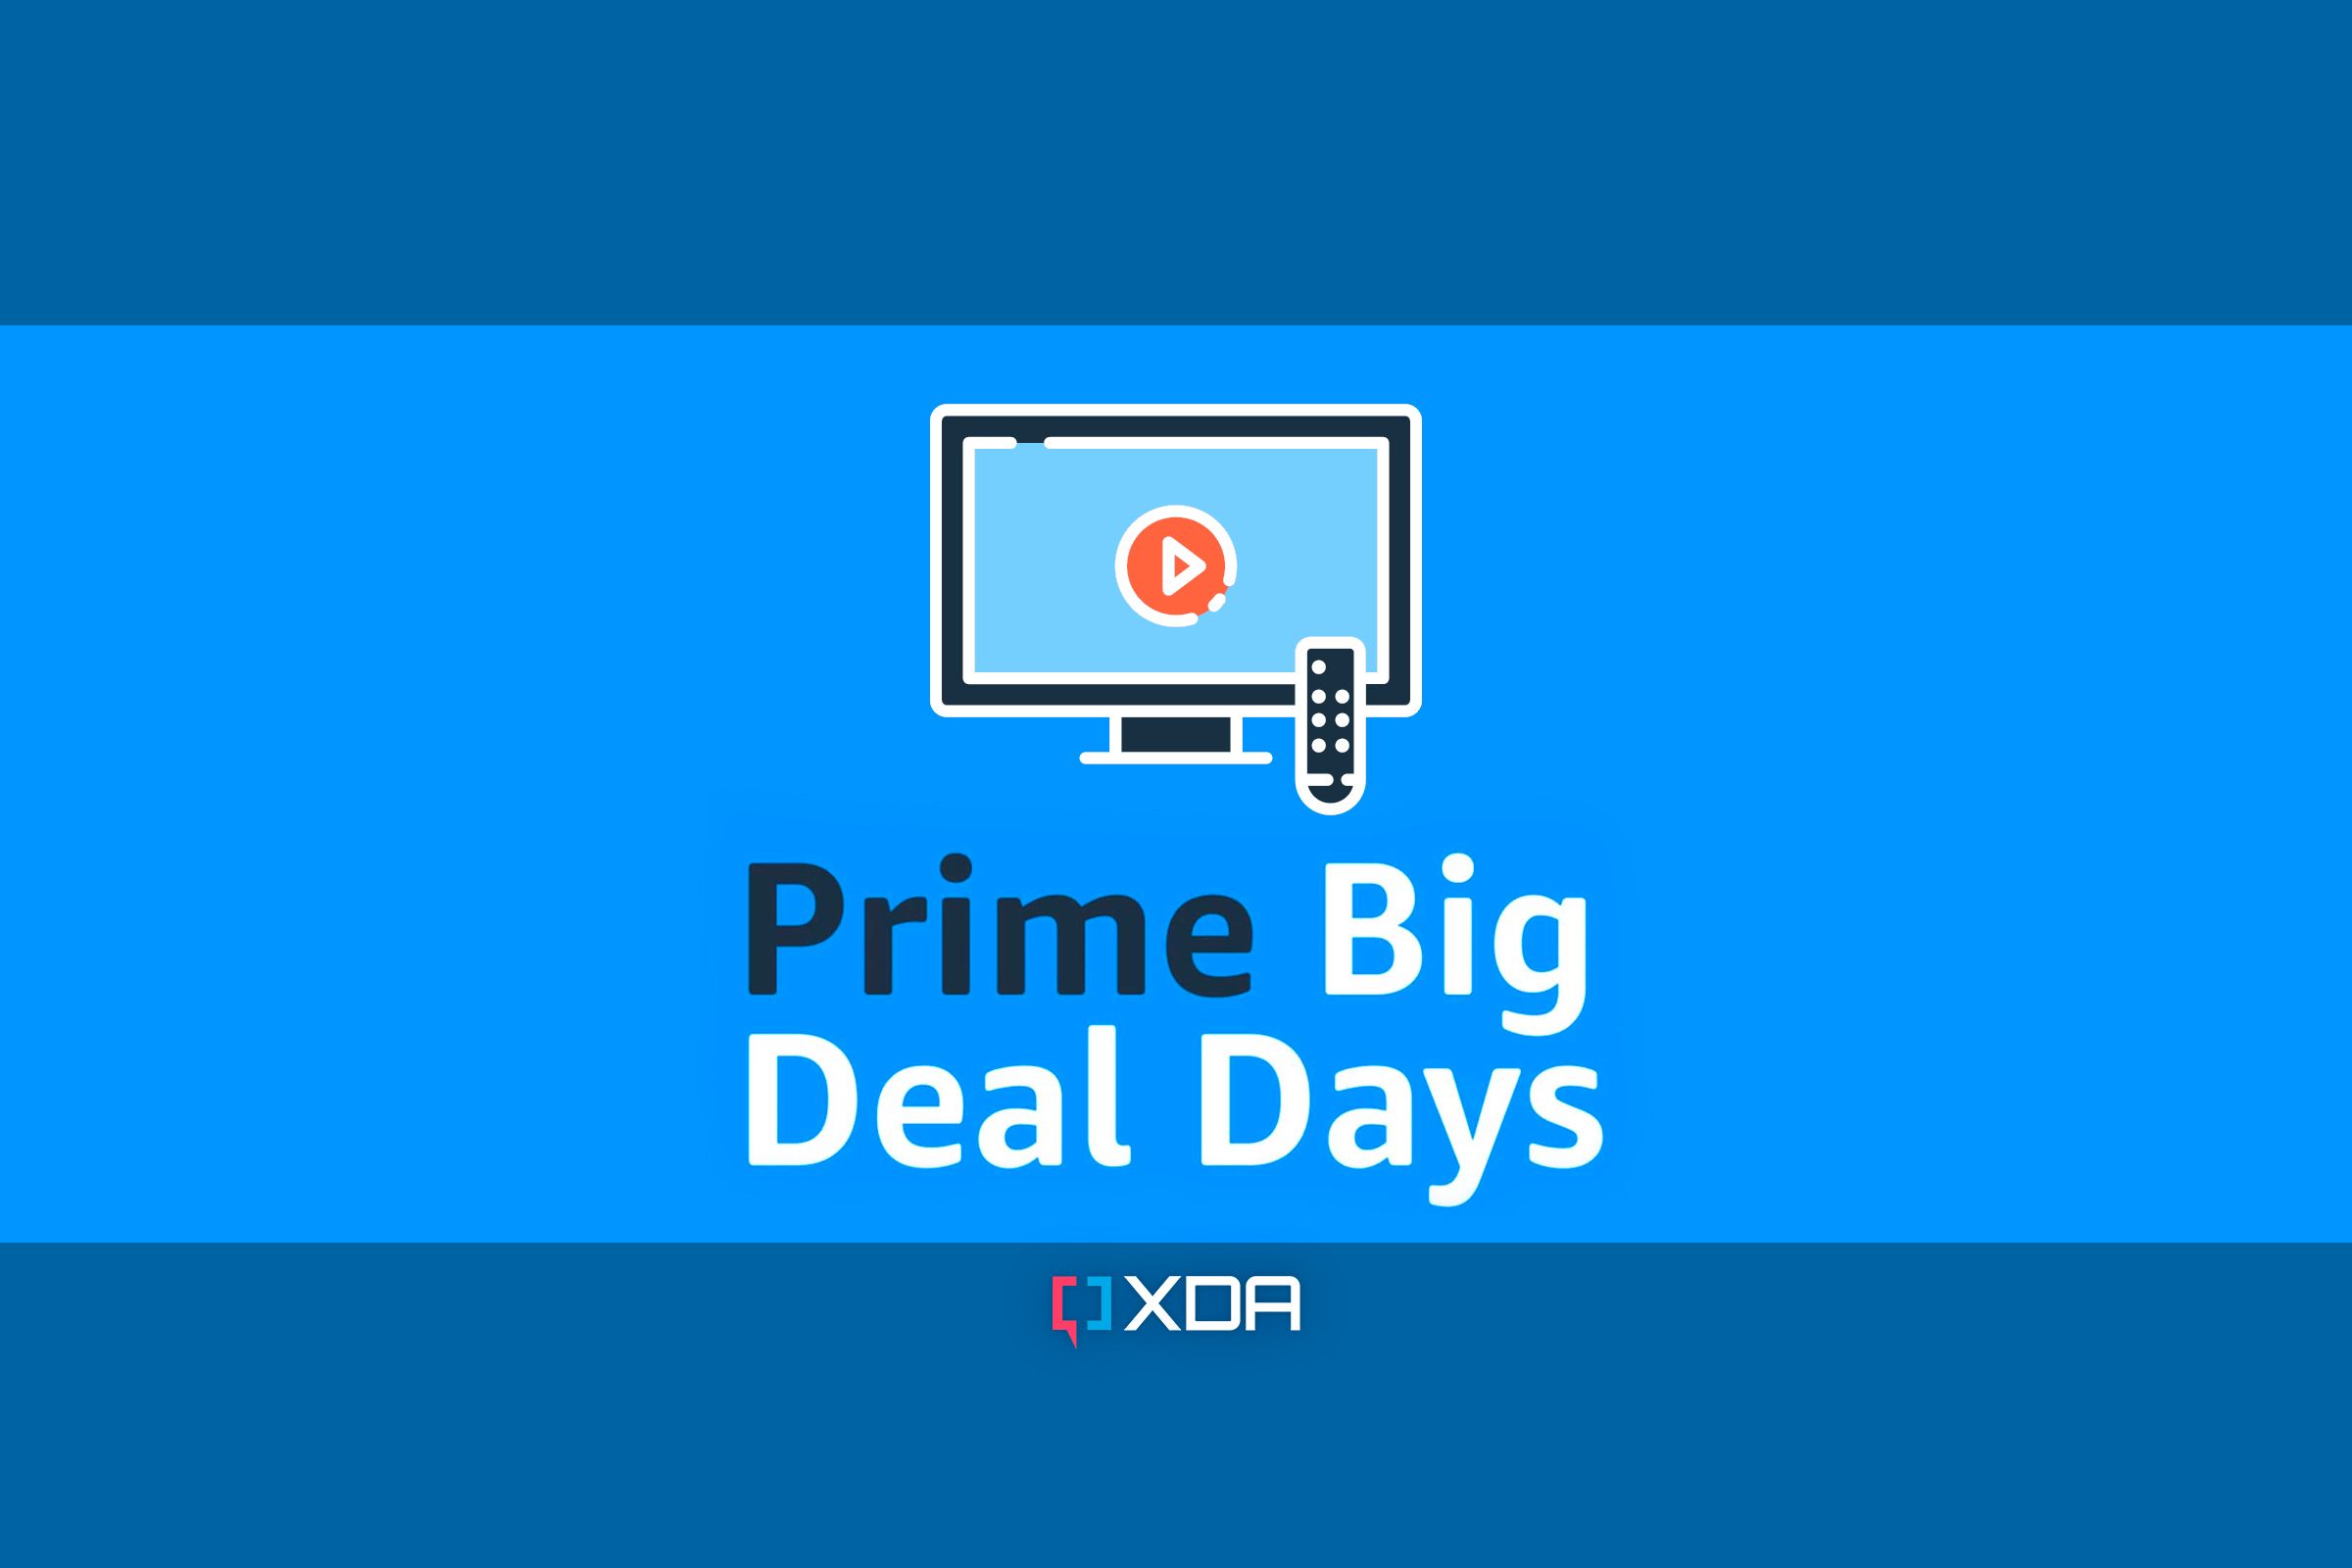 Should you buy a TV during 's Prime Big Deal Days?